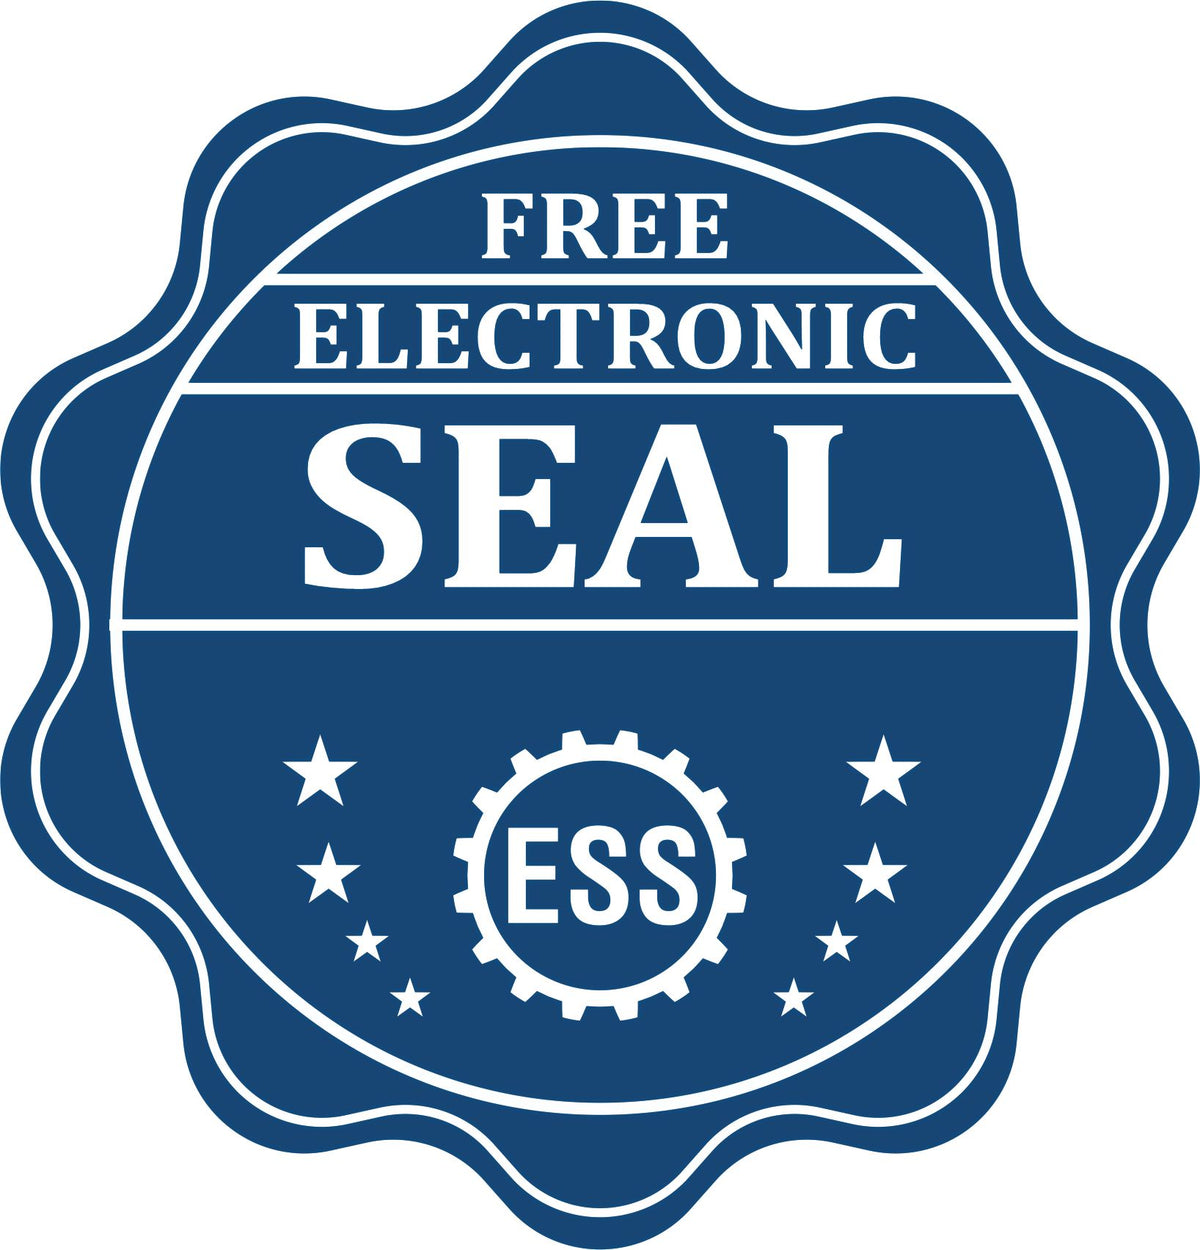 A badge showing a free electronic seal for the Soft Pocket Iowa Landscape Architect Embosser with stars and the ESS gear on the emblem.